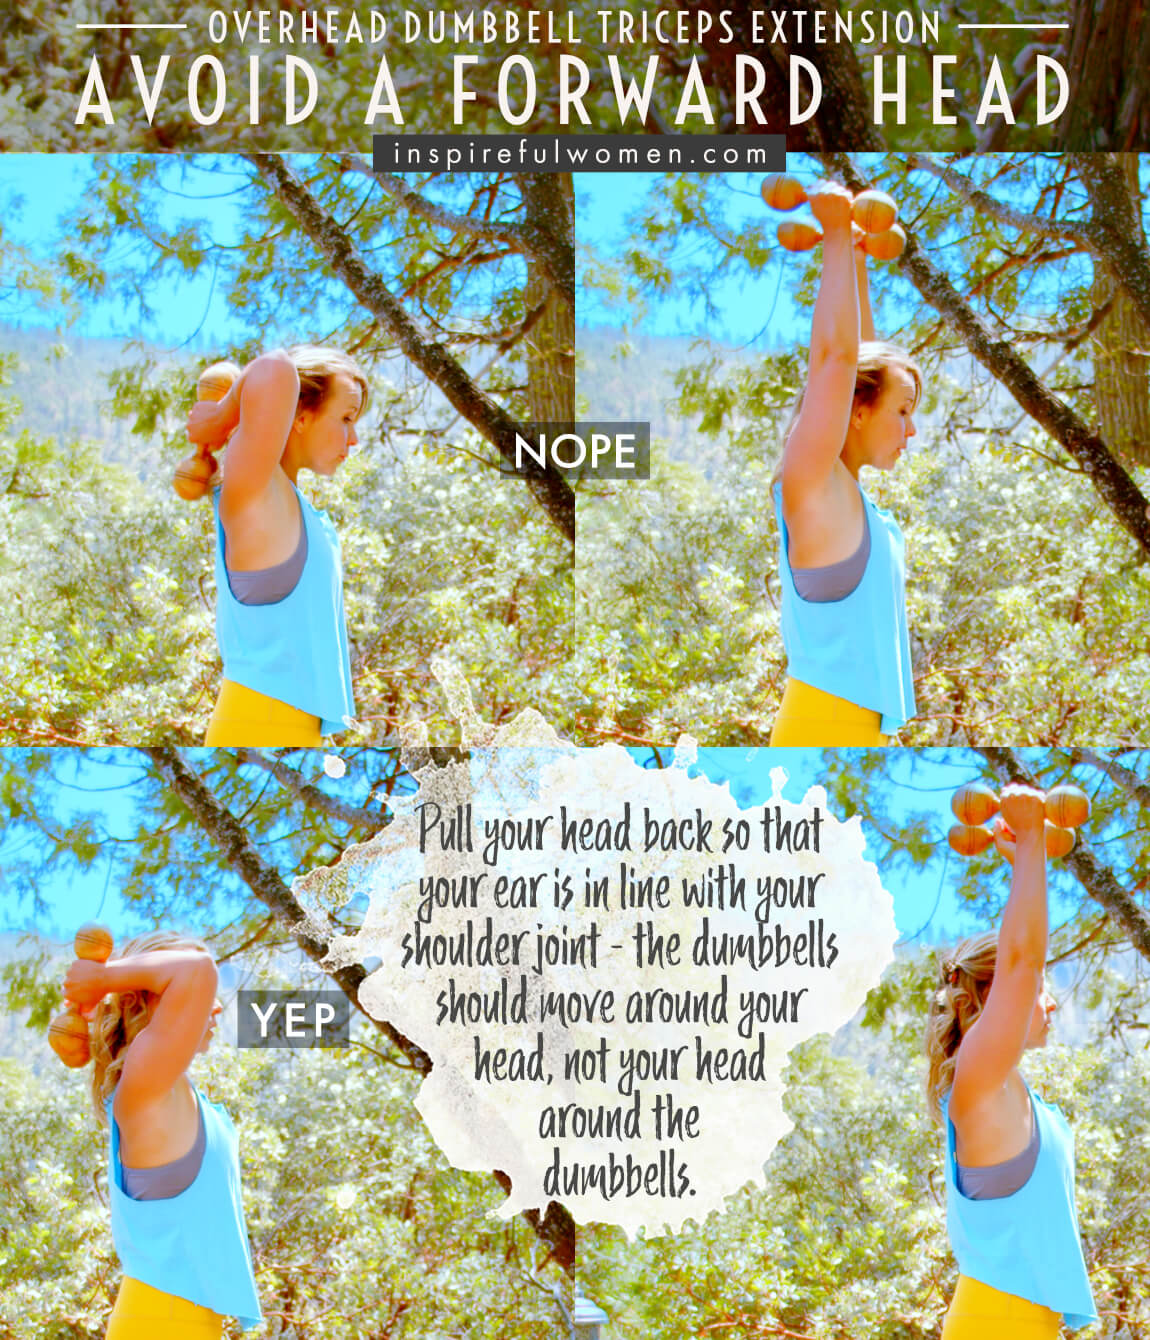 avoid-a-forward-head-overhead-dumbbell-triceps-extension-arm-workout-common-mistakes